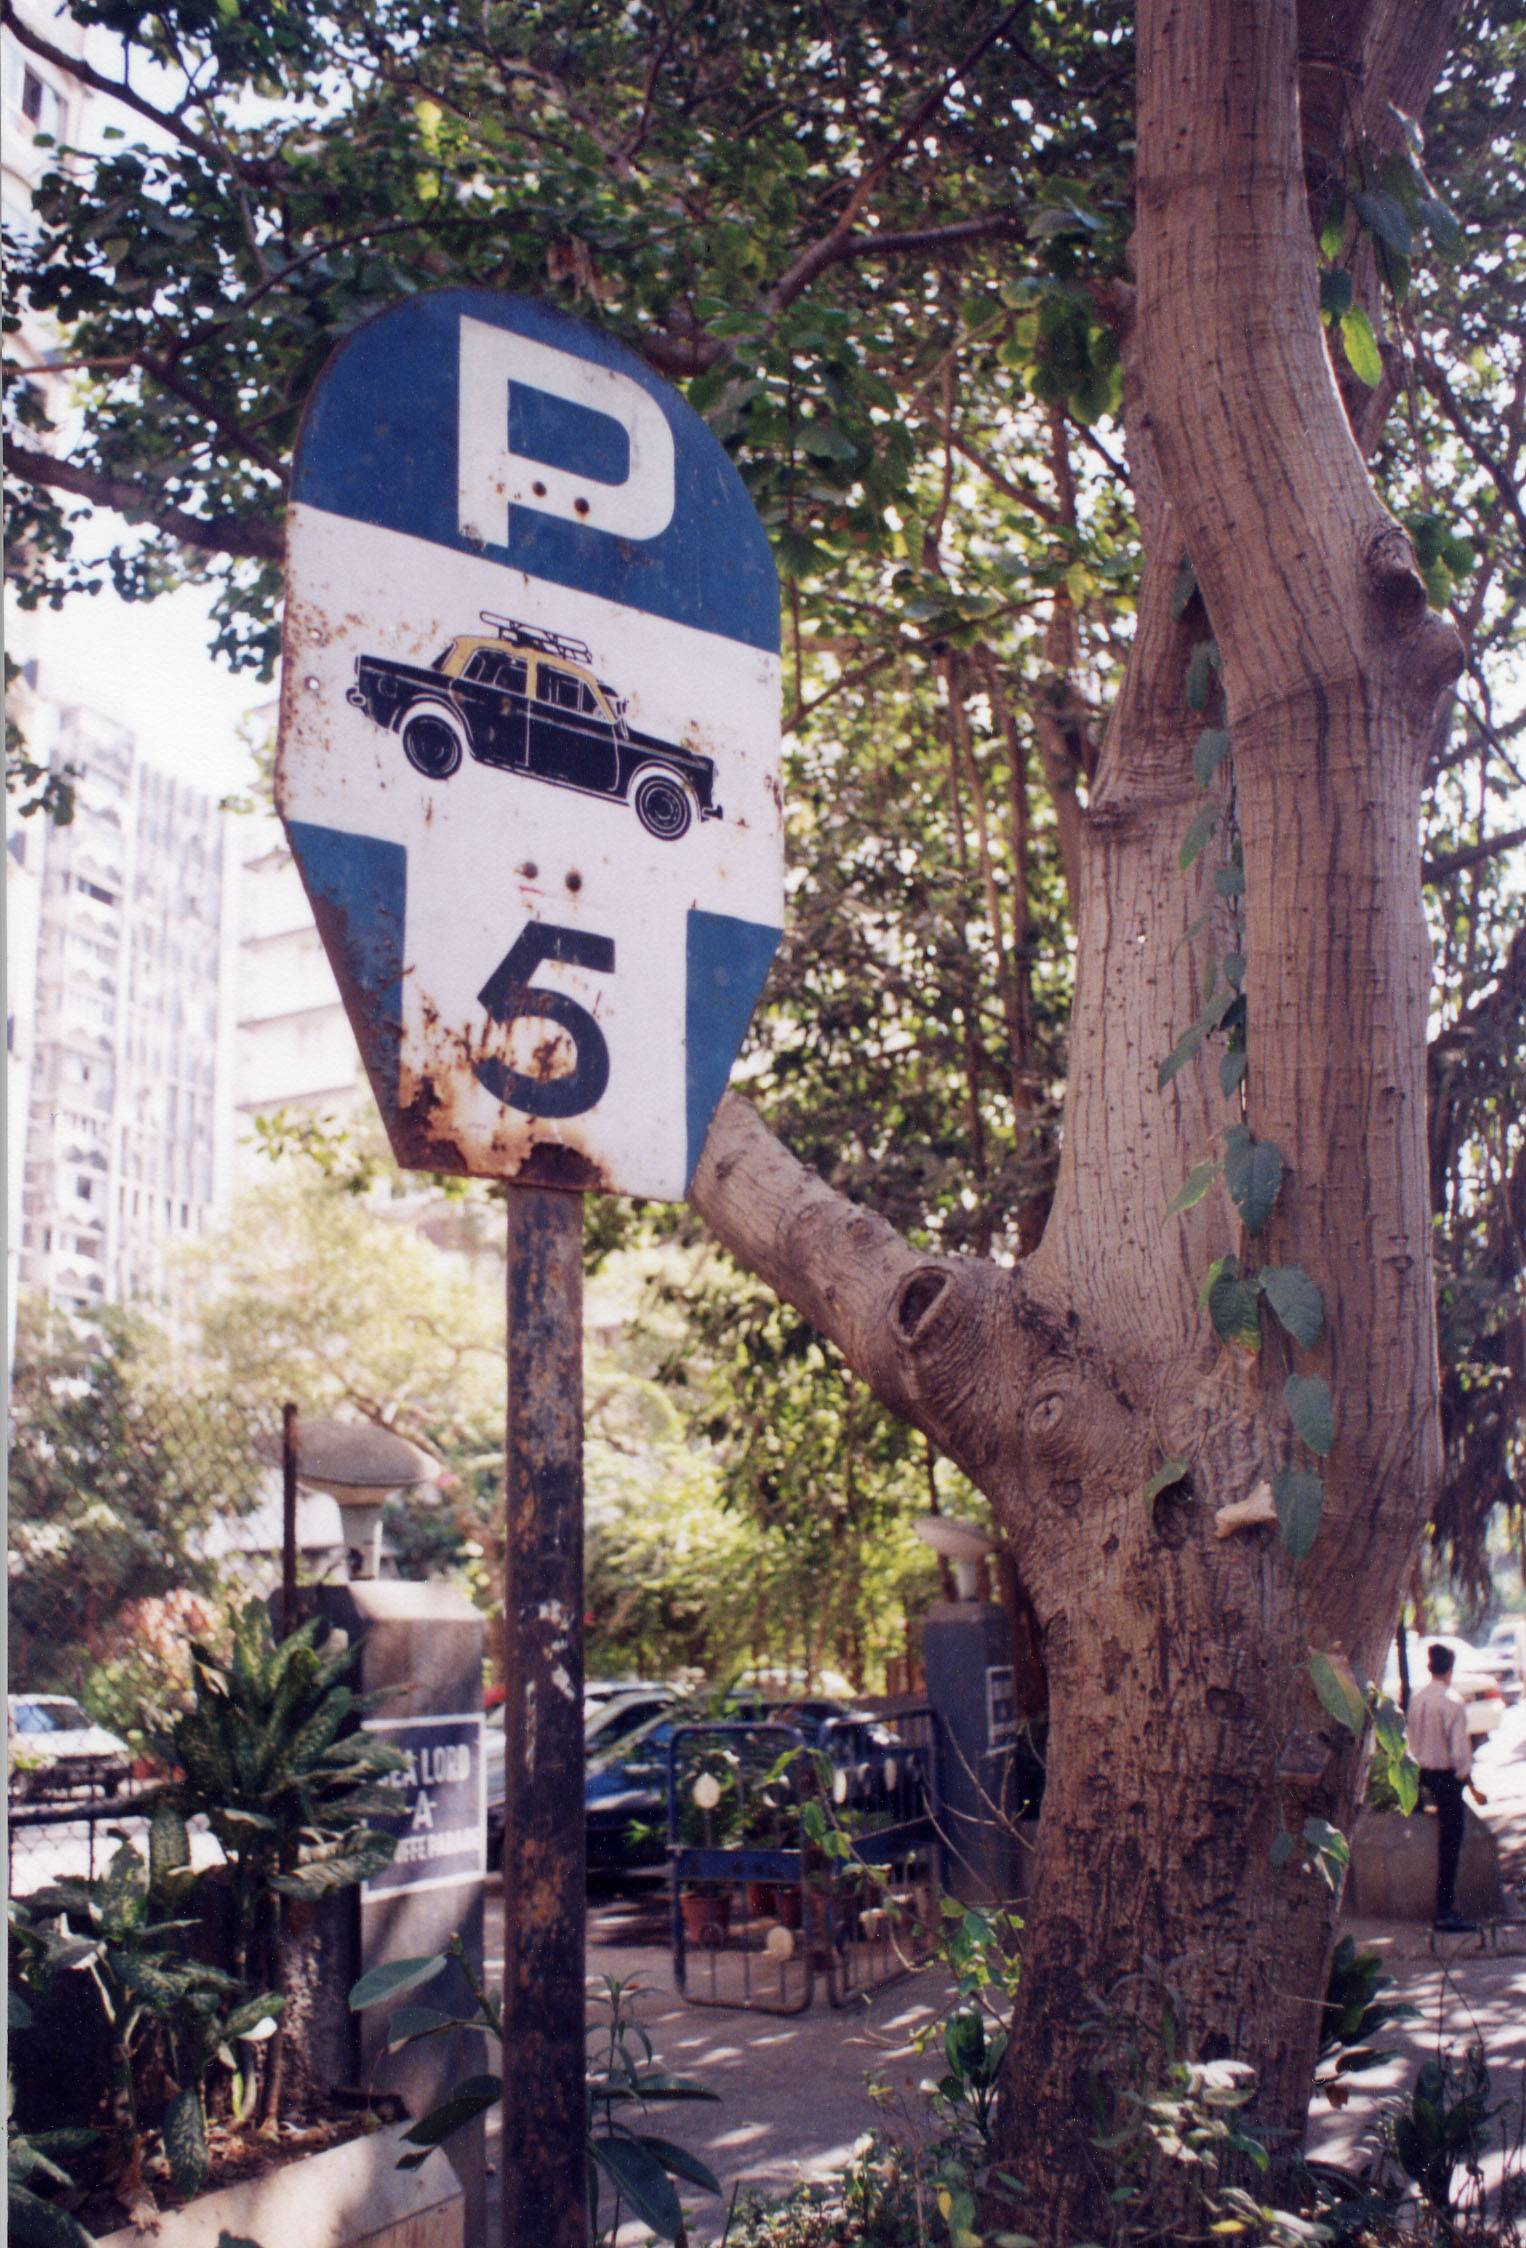 Taxi Stand (Bombay)